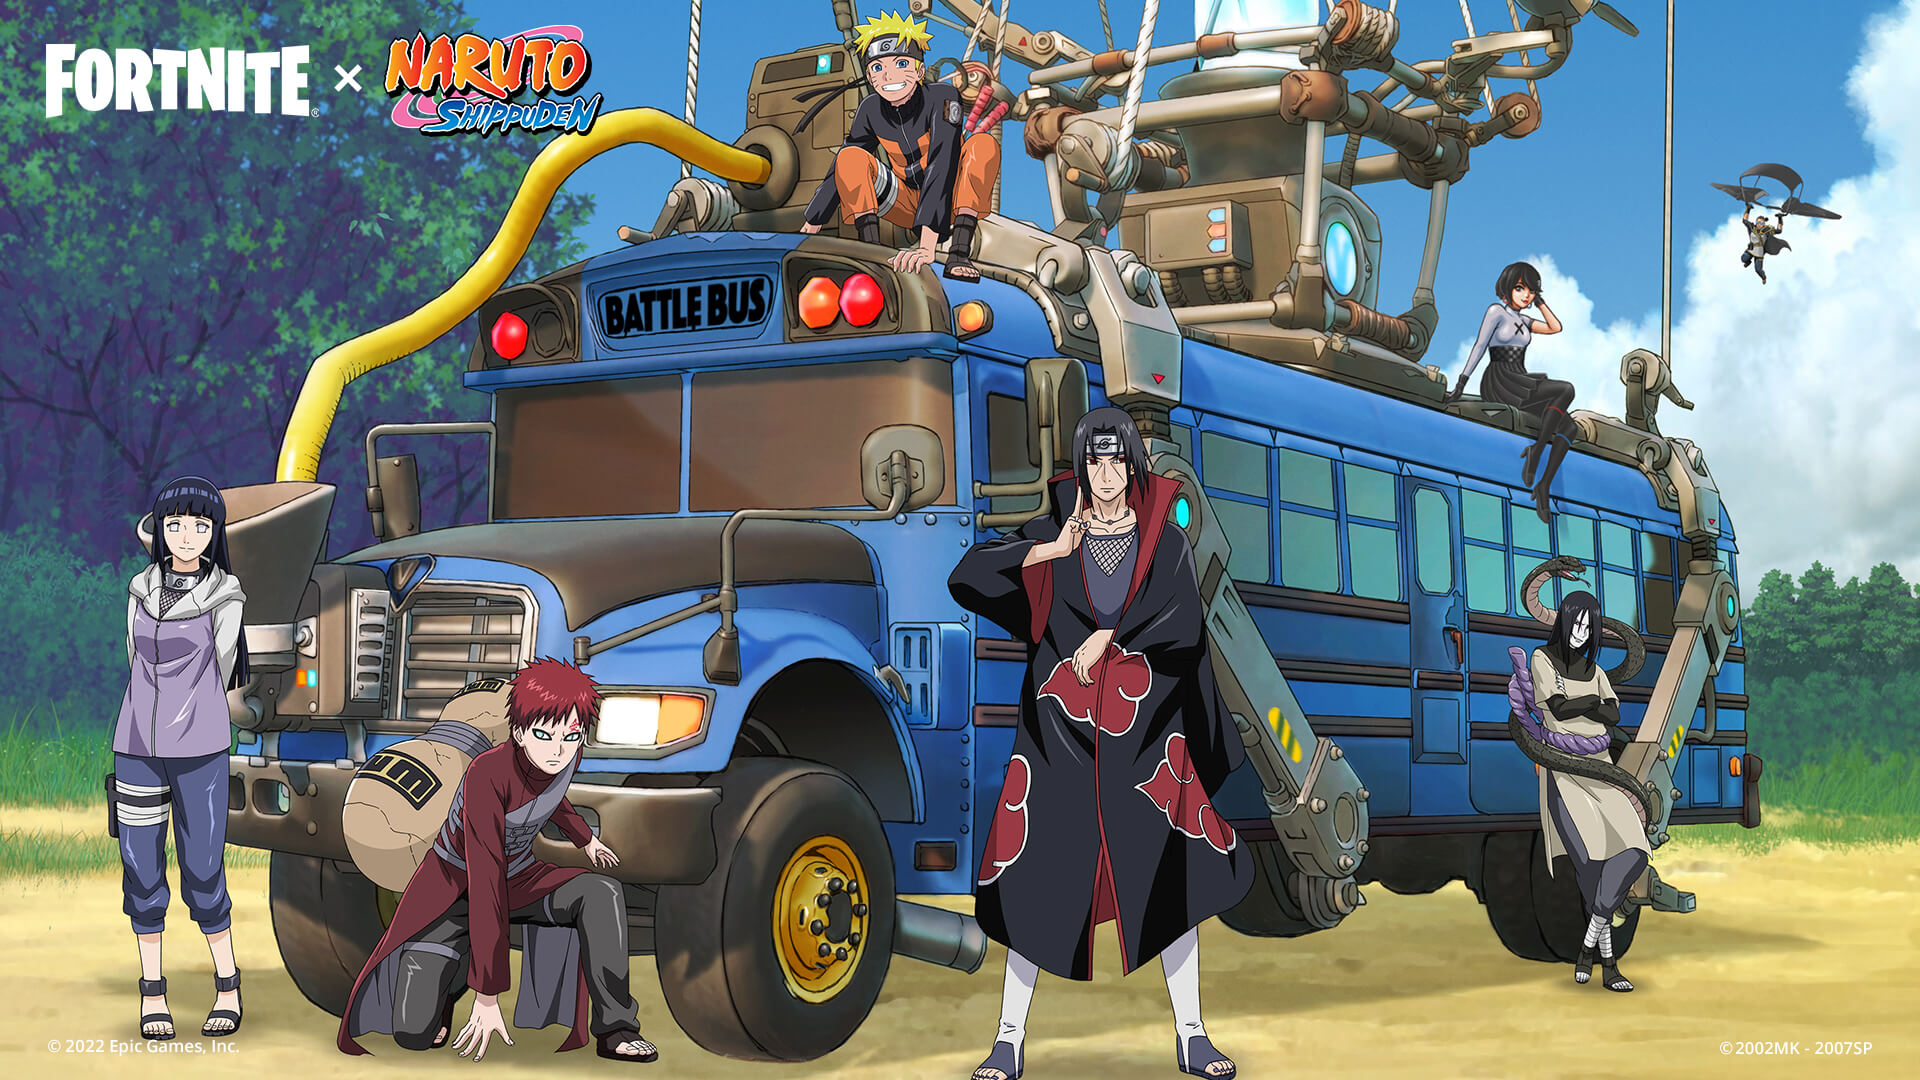 Hinata, Gaara, Orochimaru, and Itachi standing in front of the battle bus